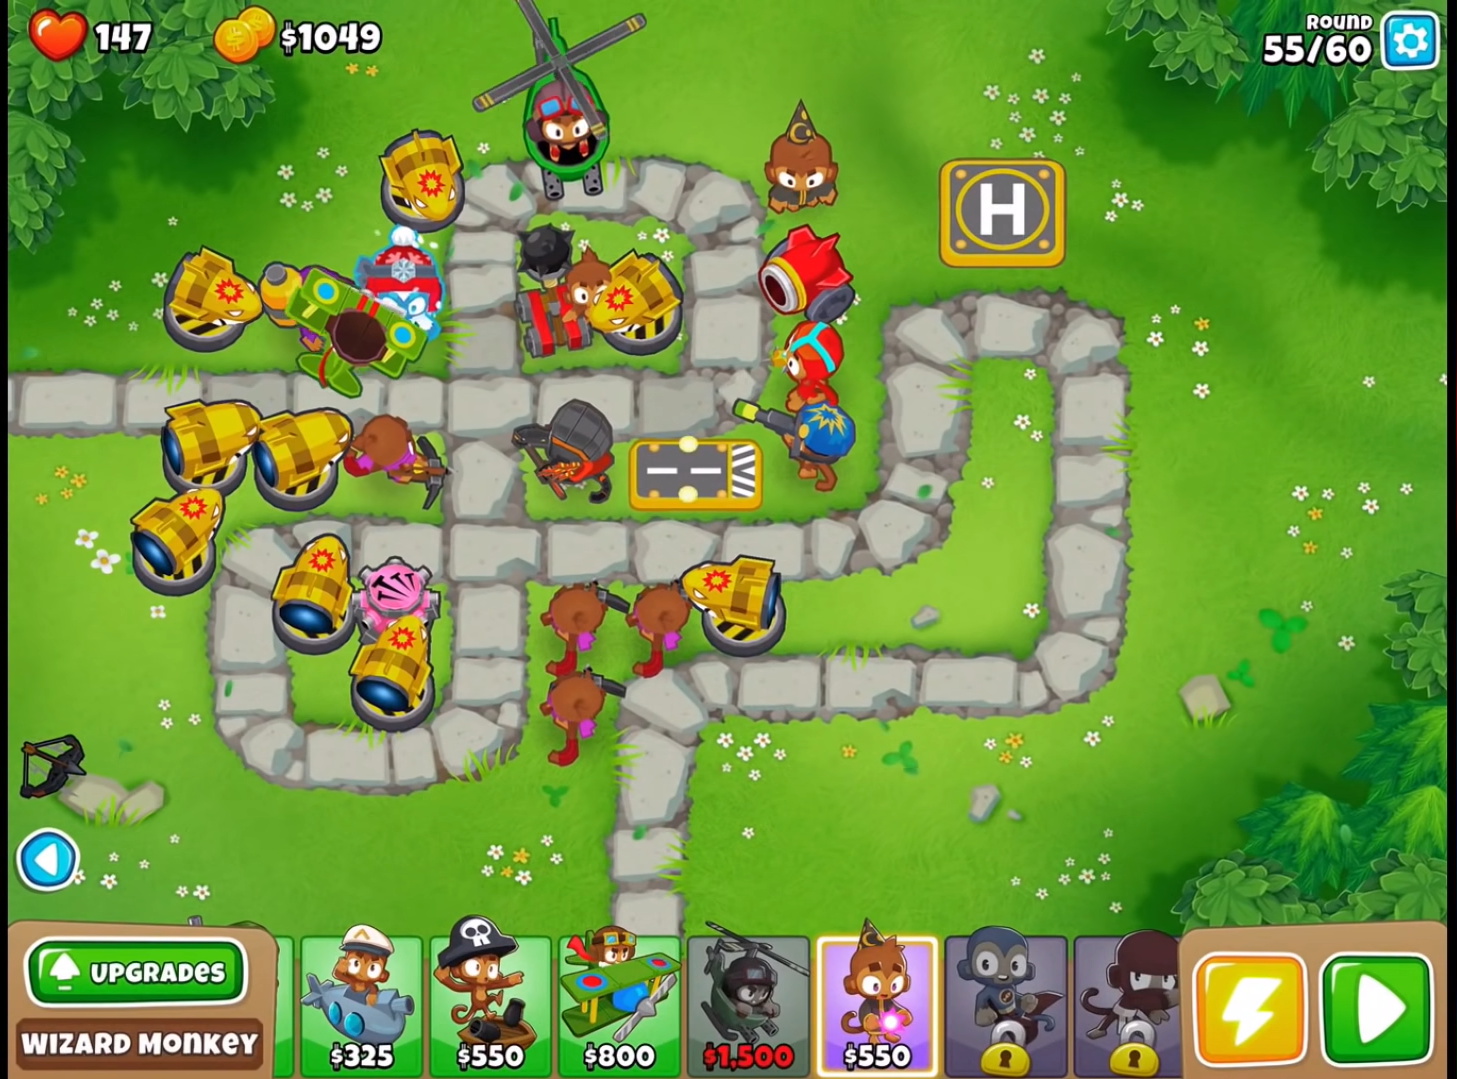 Best strategy to win in Bloons TD 6 